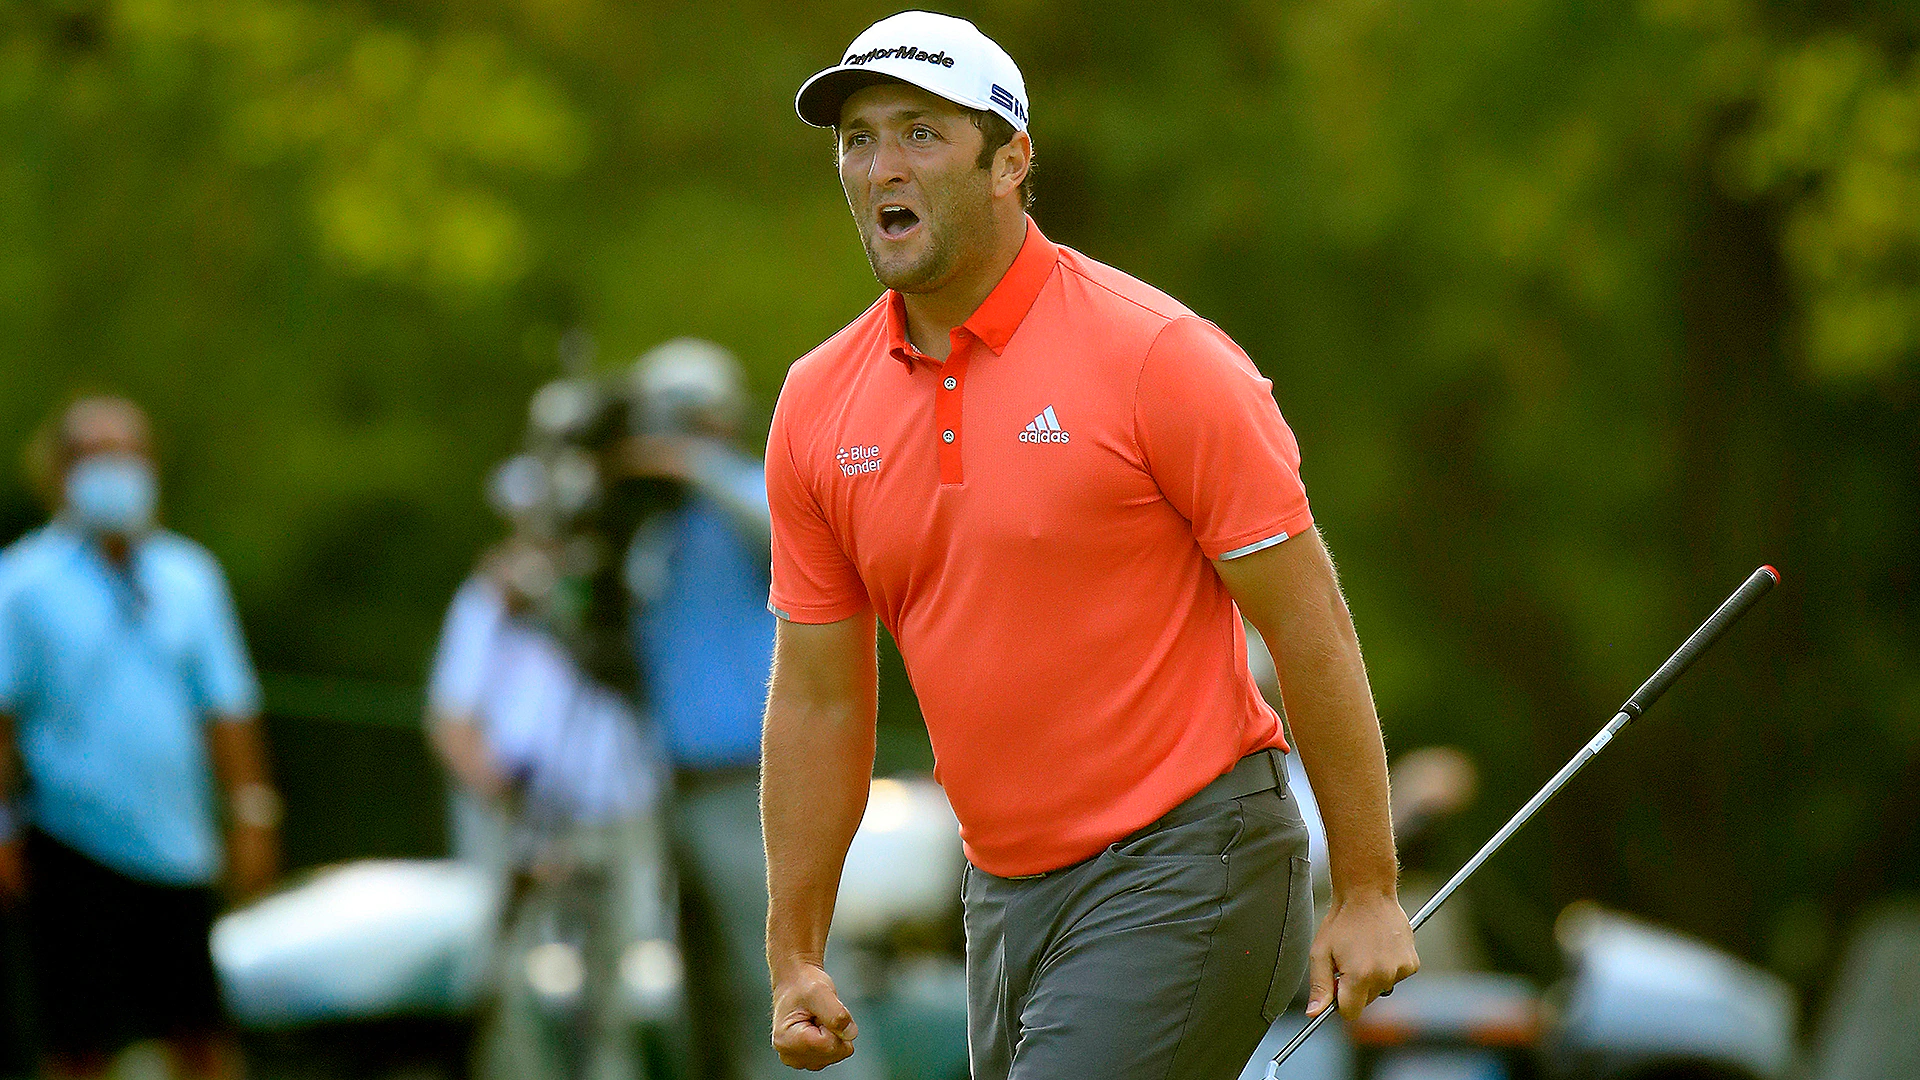 How a penalty helped Jon Rahm win the BMW Championship